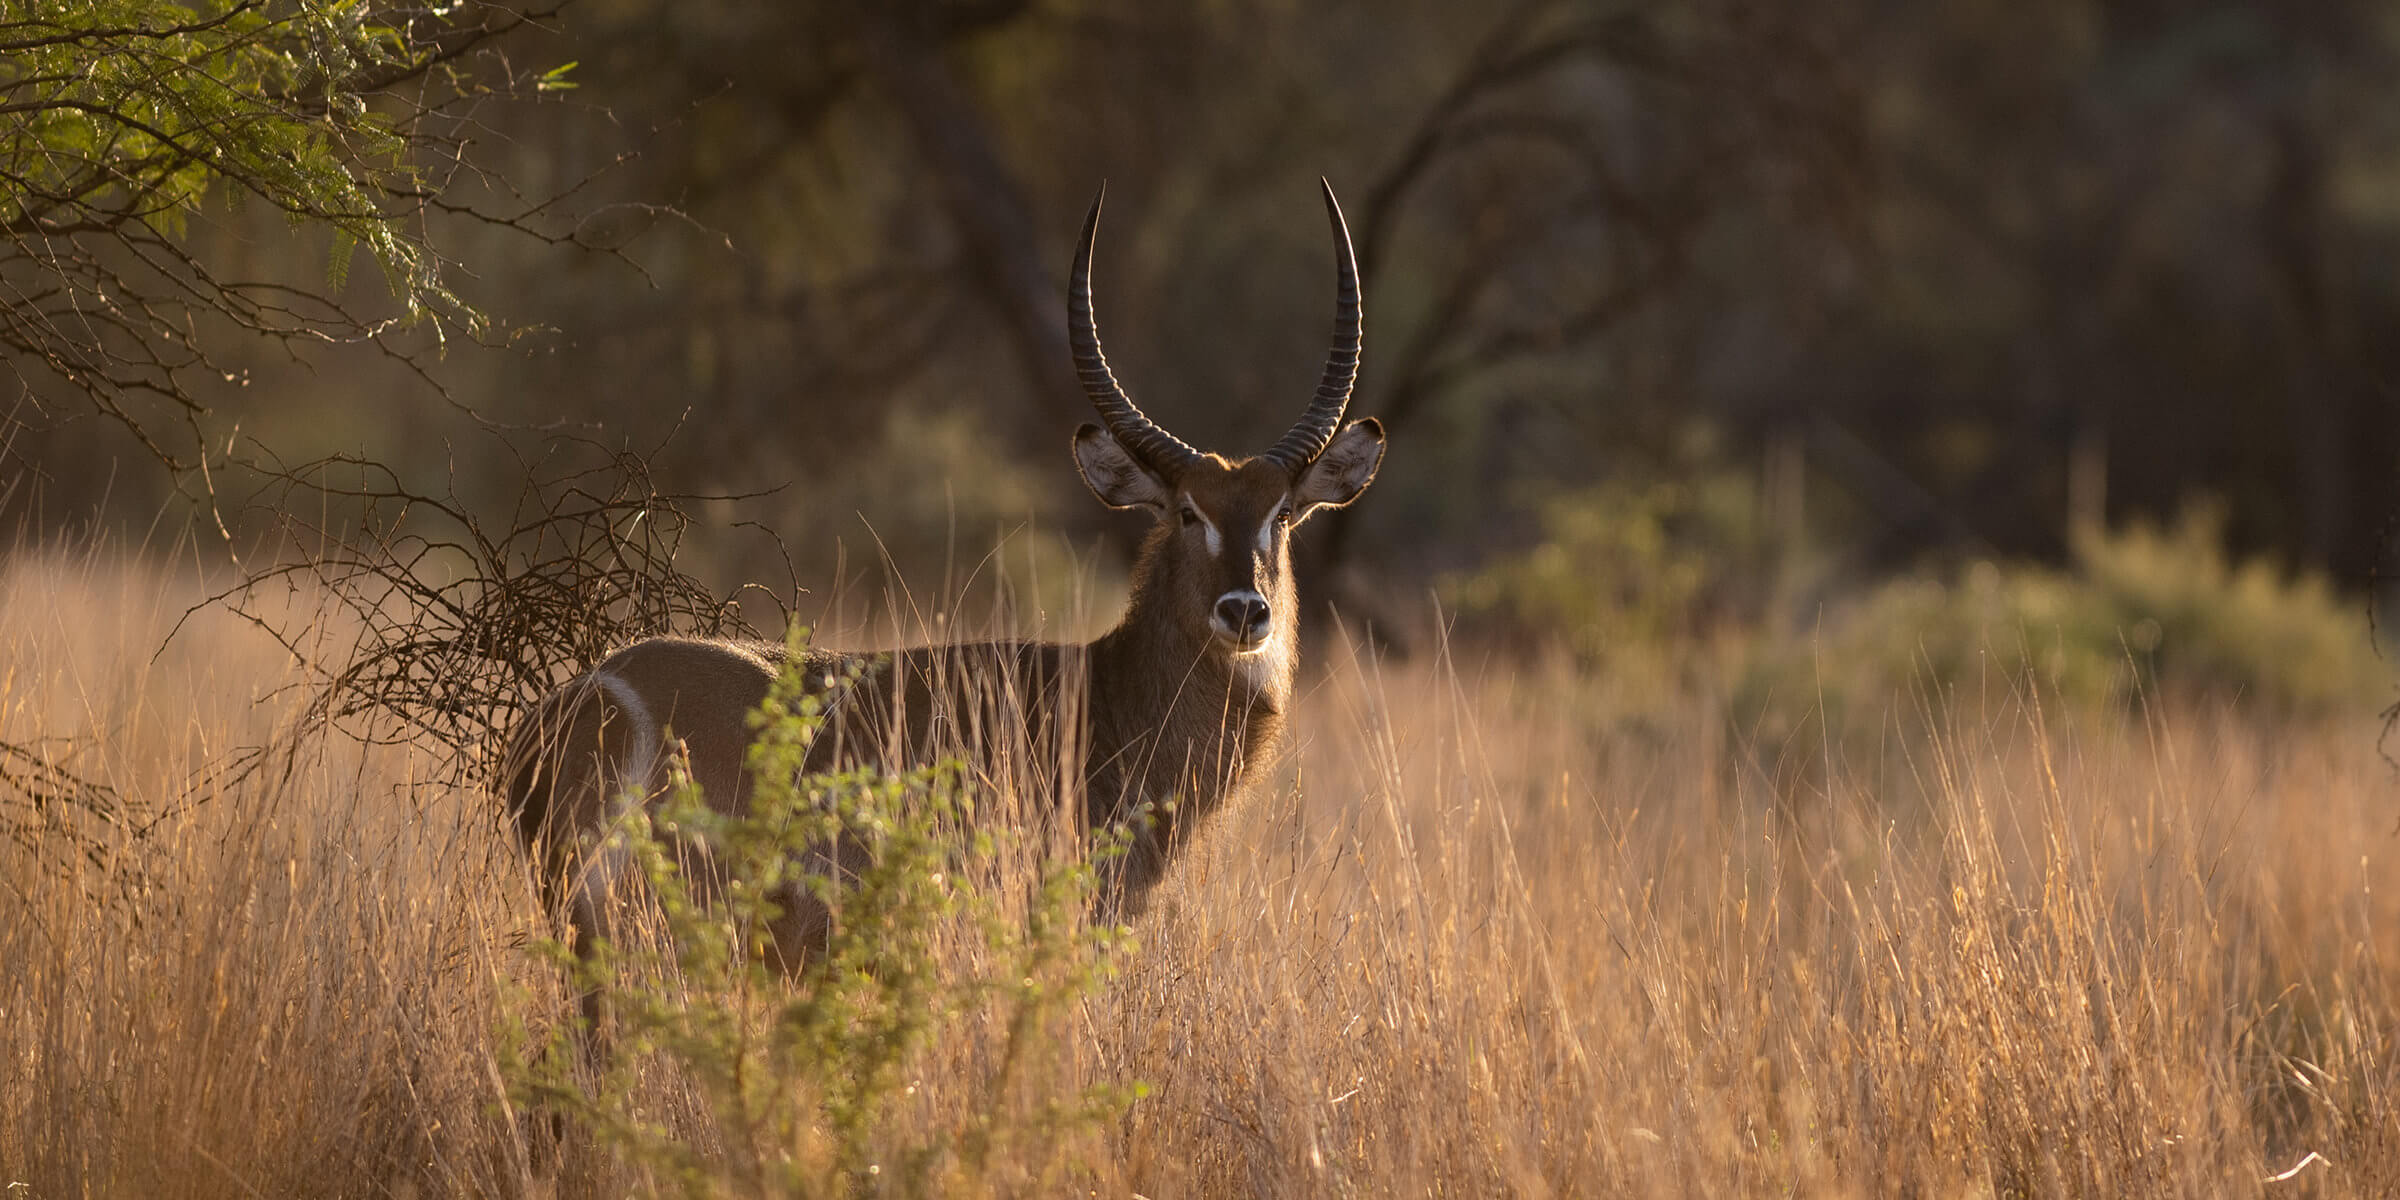 A Waterbuck cautiously observes his surroundings.